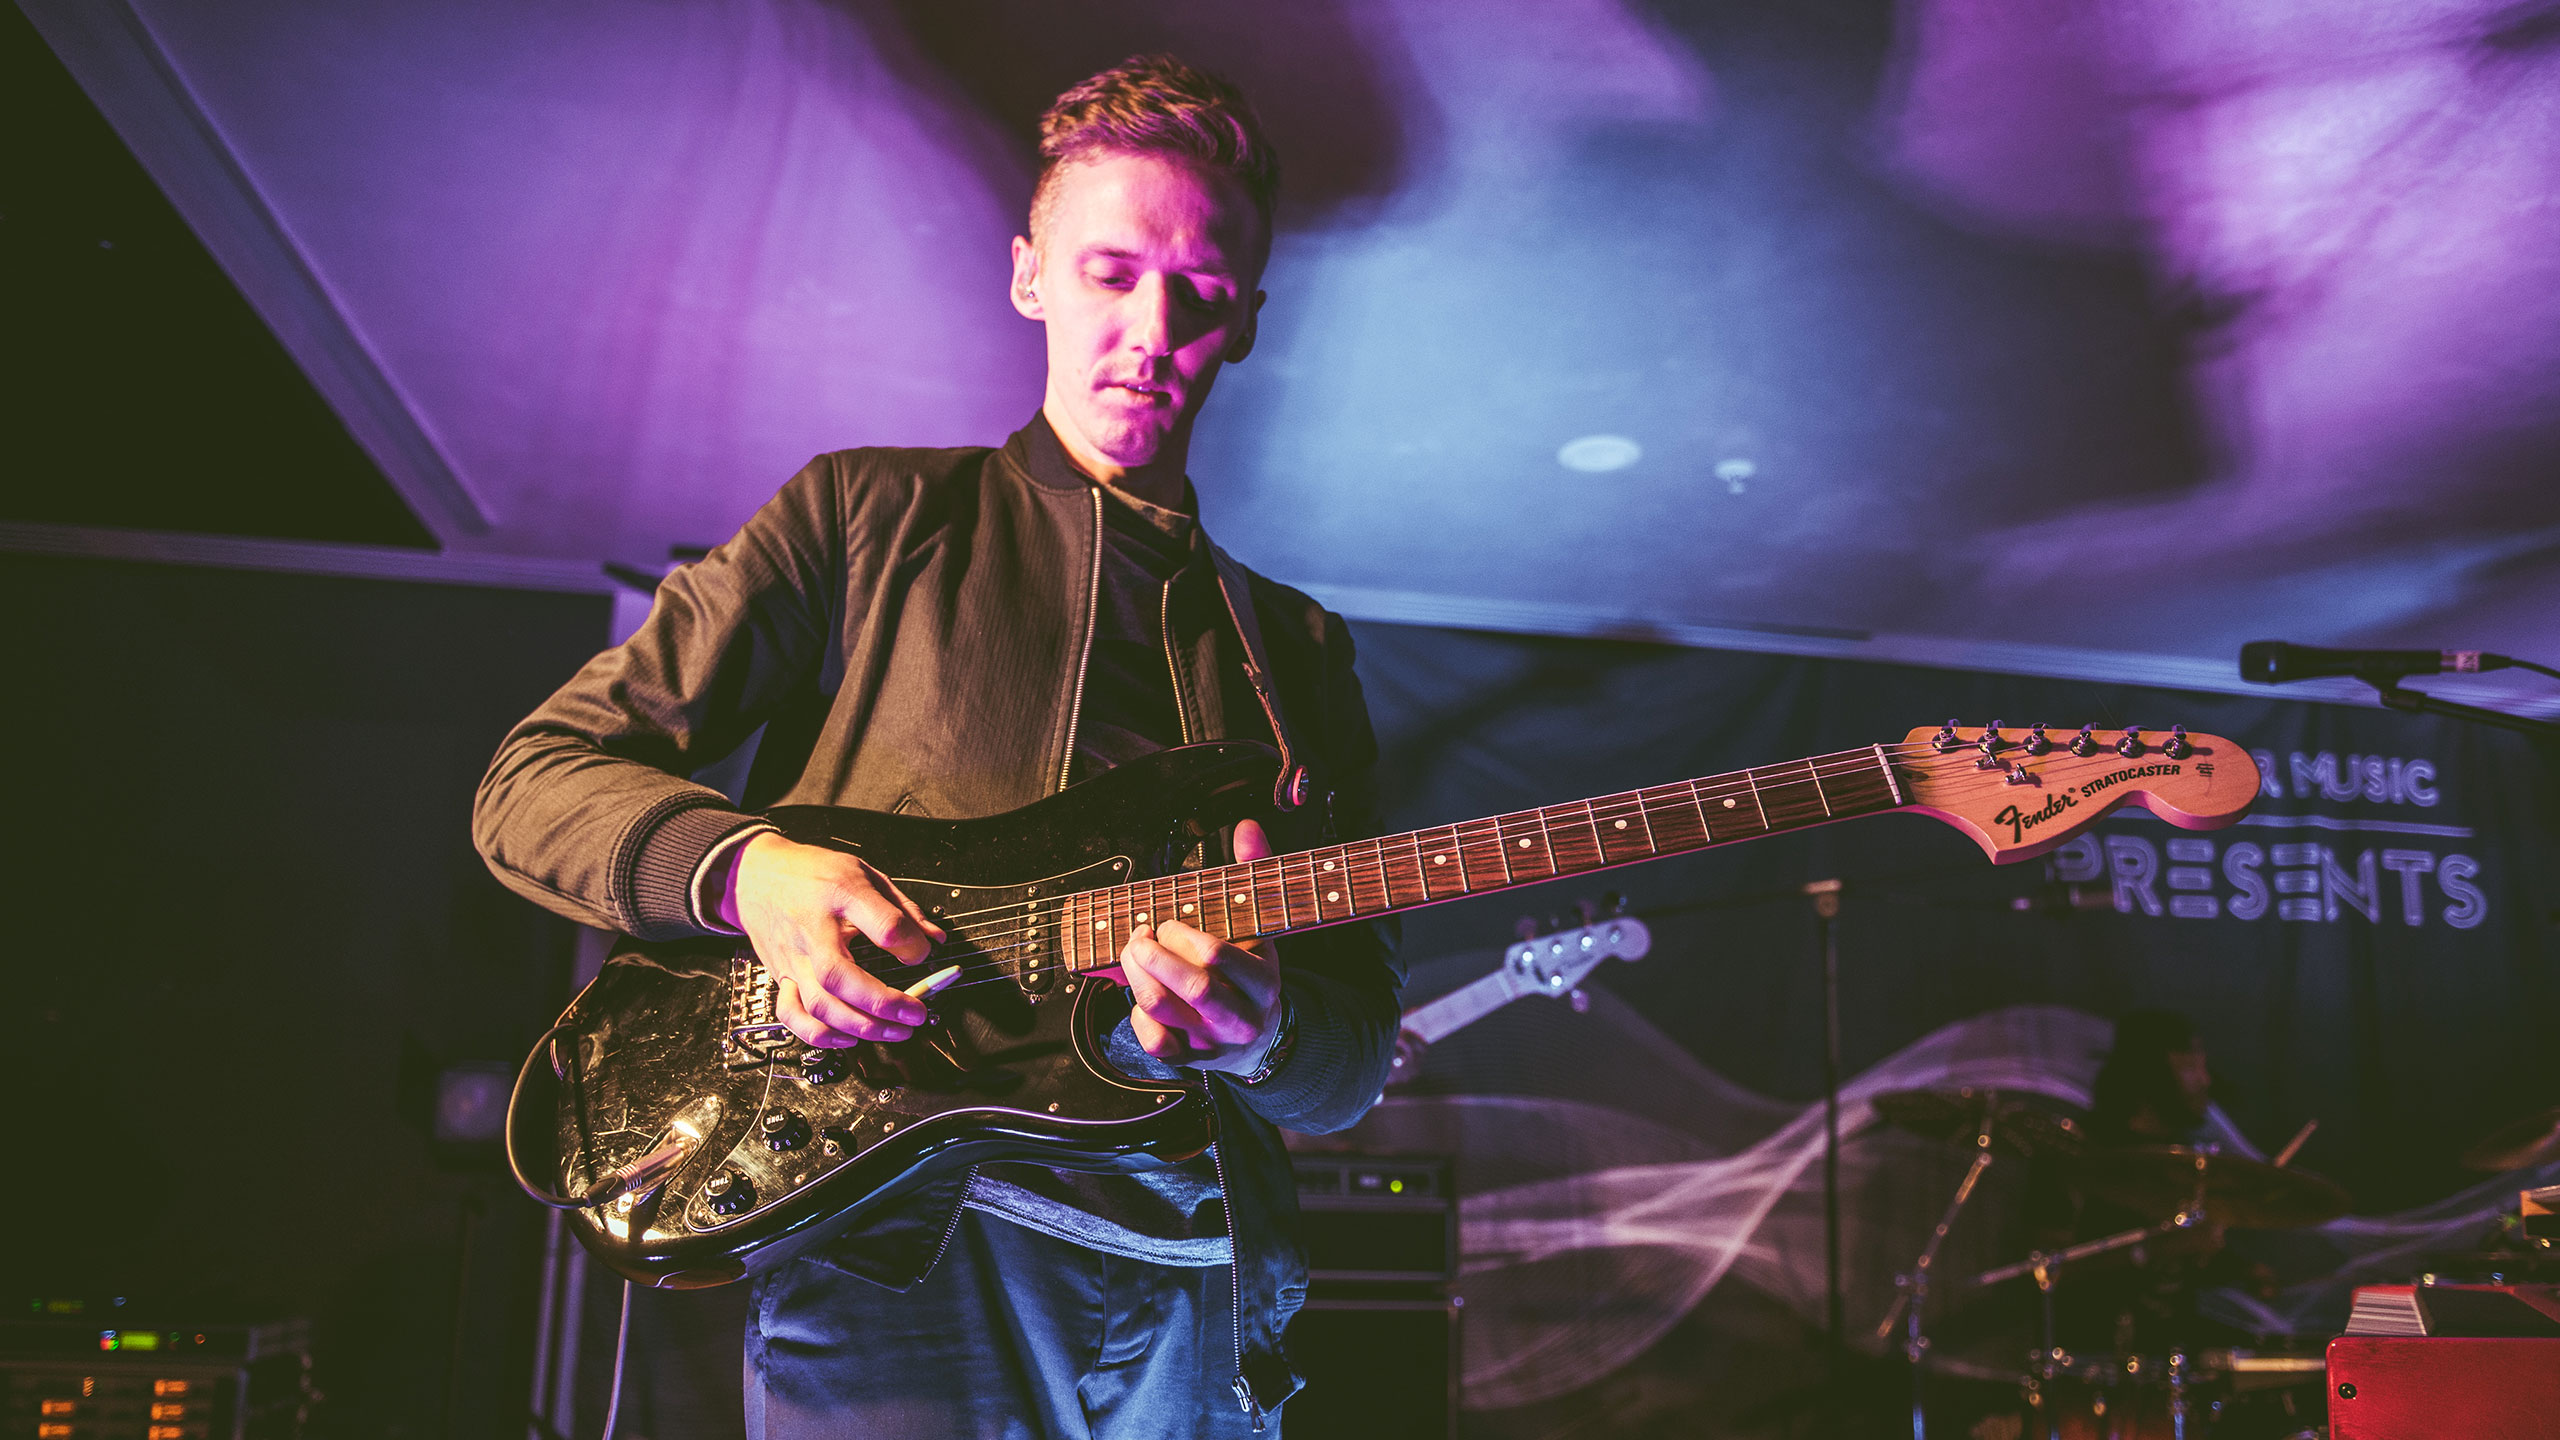 Honne's James Hatcher plays a black guitar on stage at PRS Presents, wearing a dark shirt